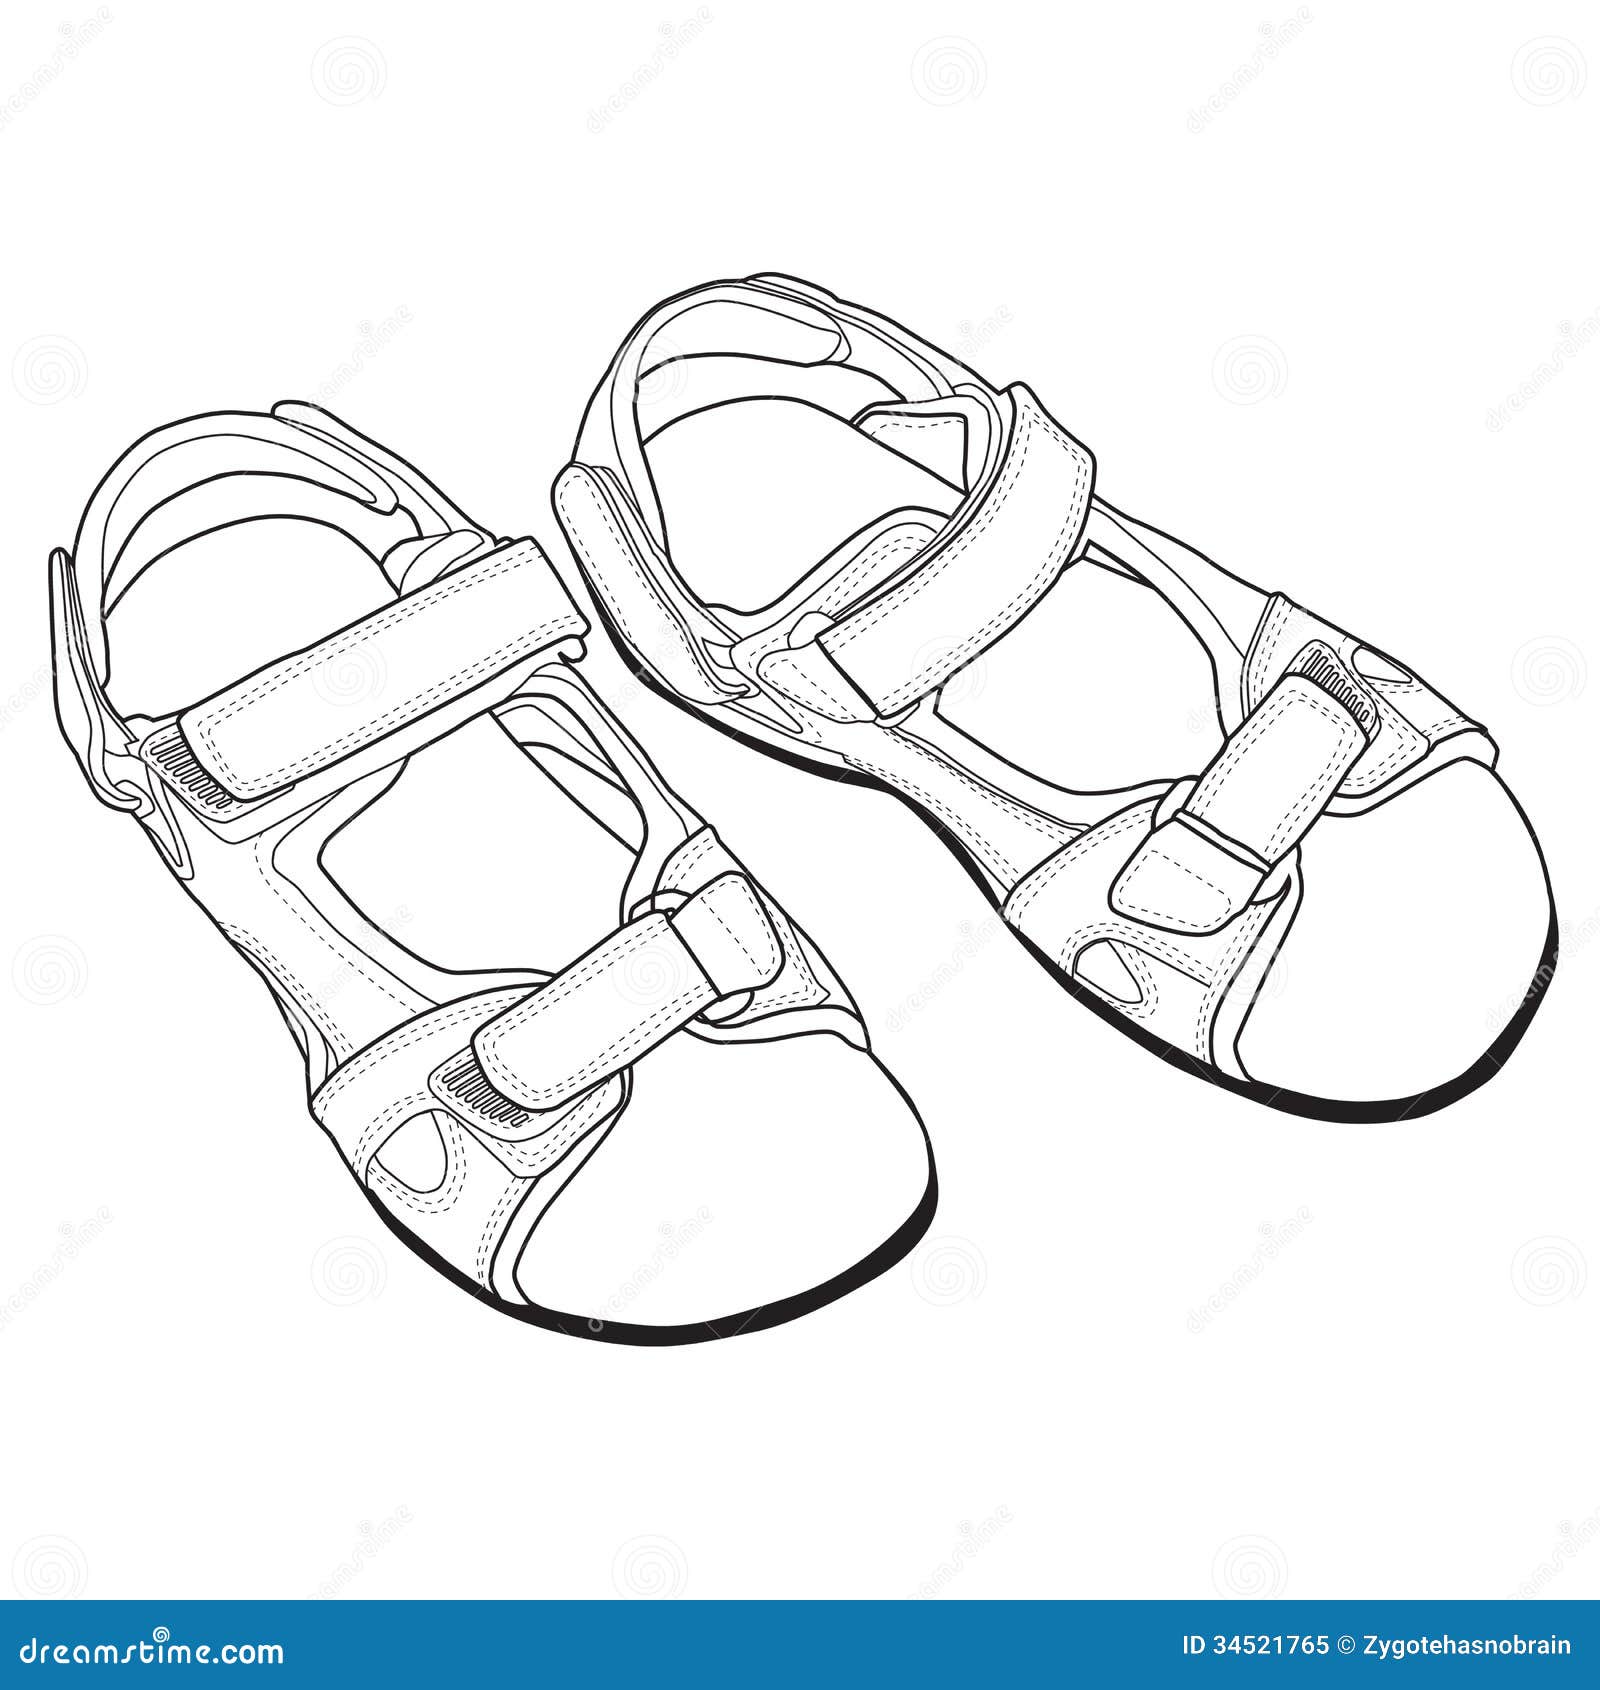 Vector Line Art Of Sandals. Royalty Free Stock Photo - Image: 34521765